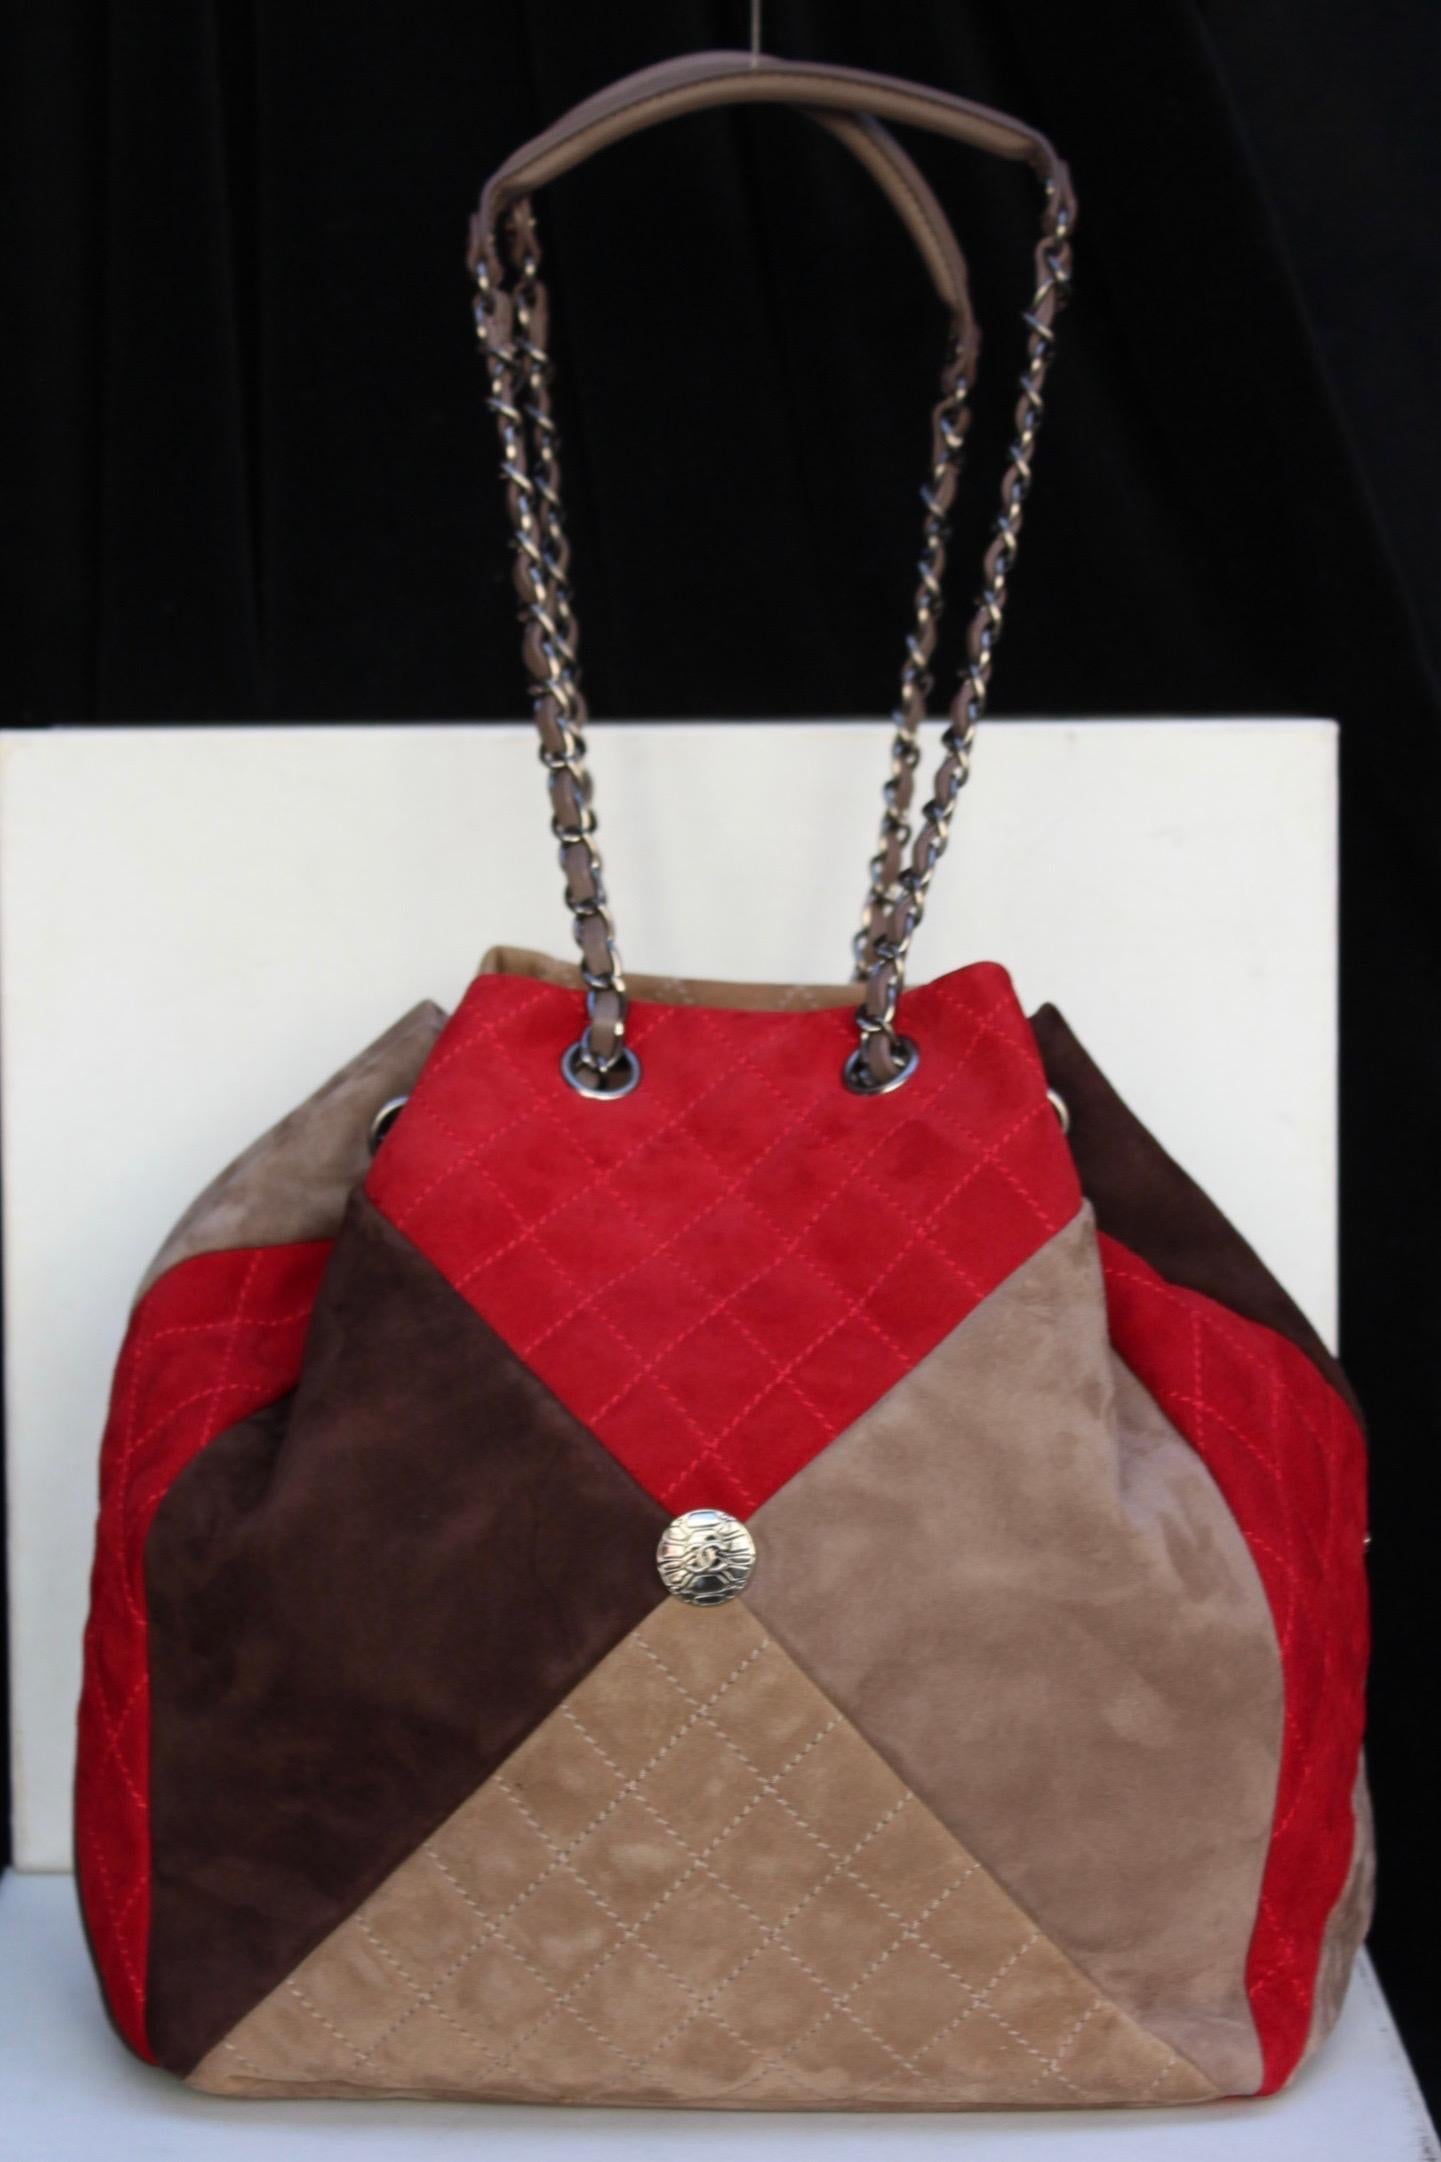 Brown Chanel large suede patchwork tote bag in beige, brown and red colors